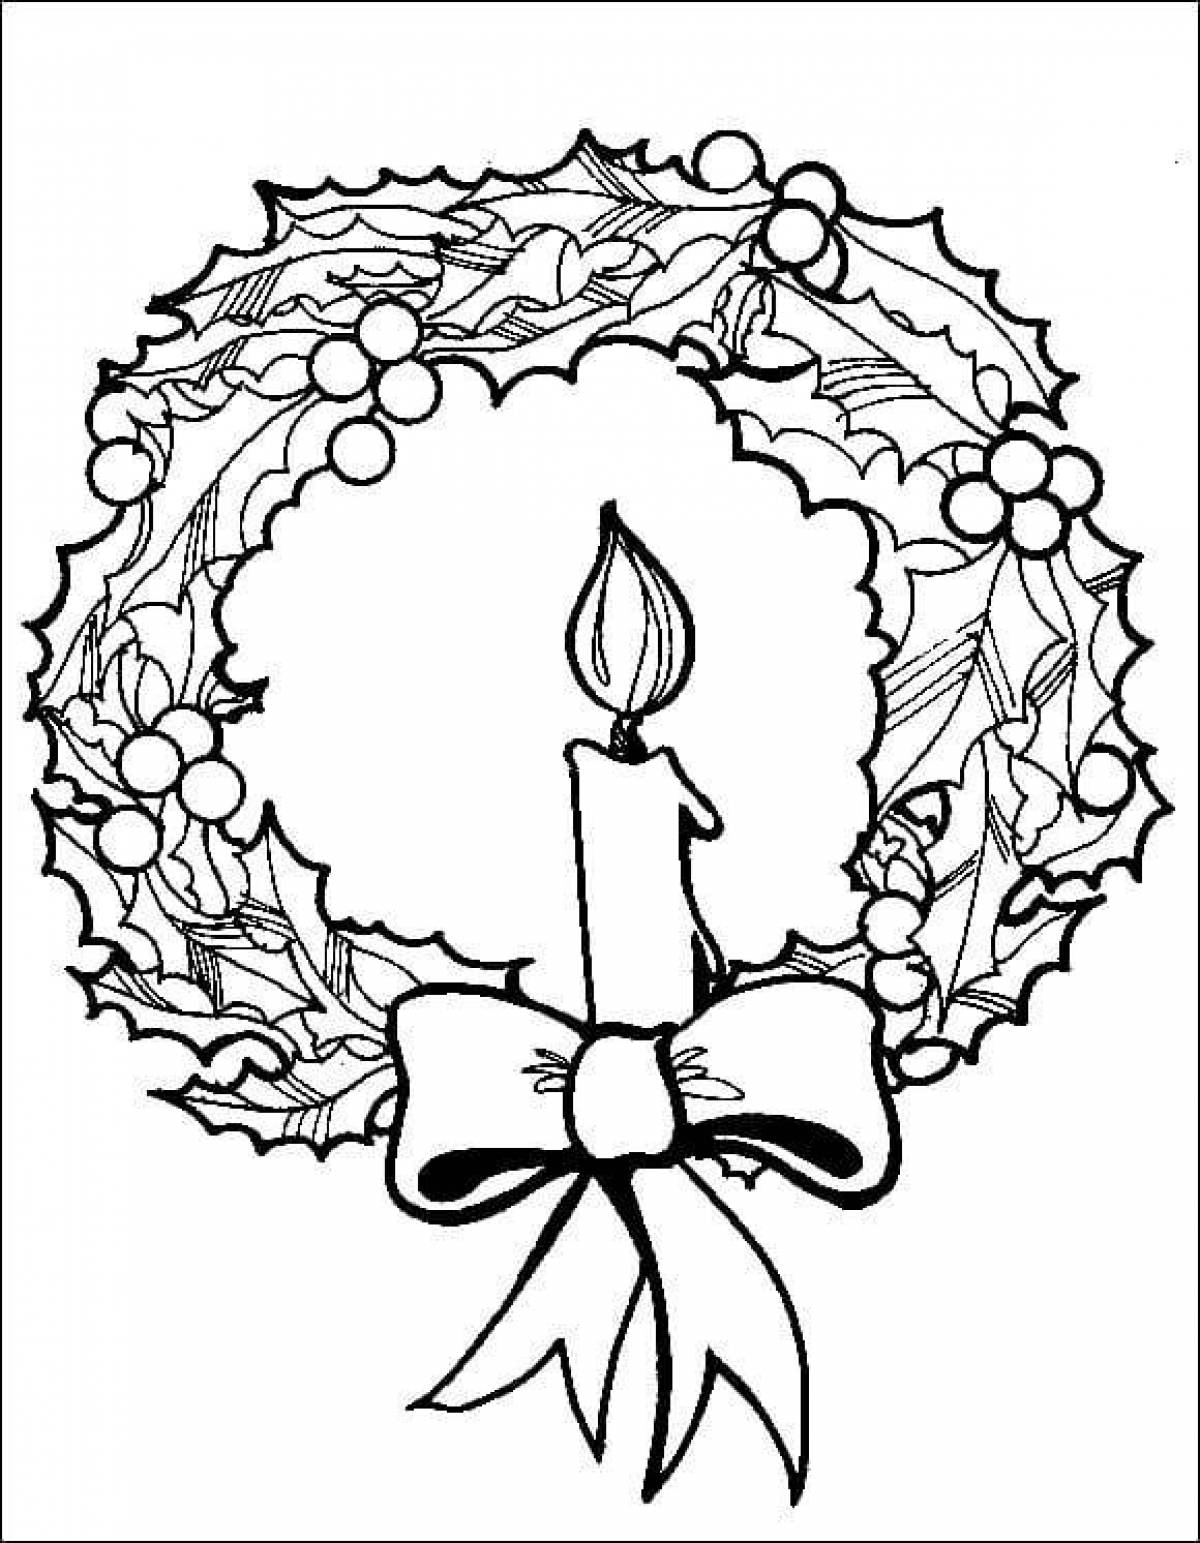 Adorable Christmas wreath coloring page